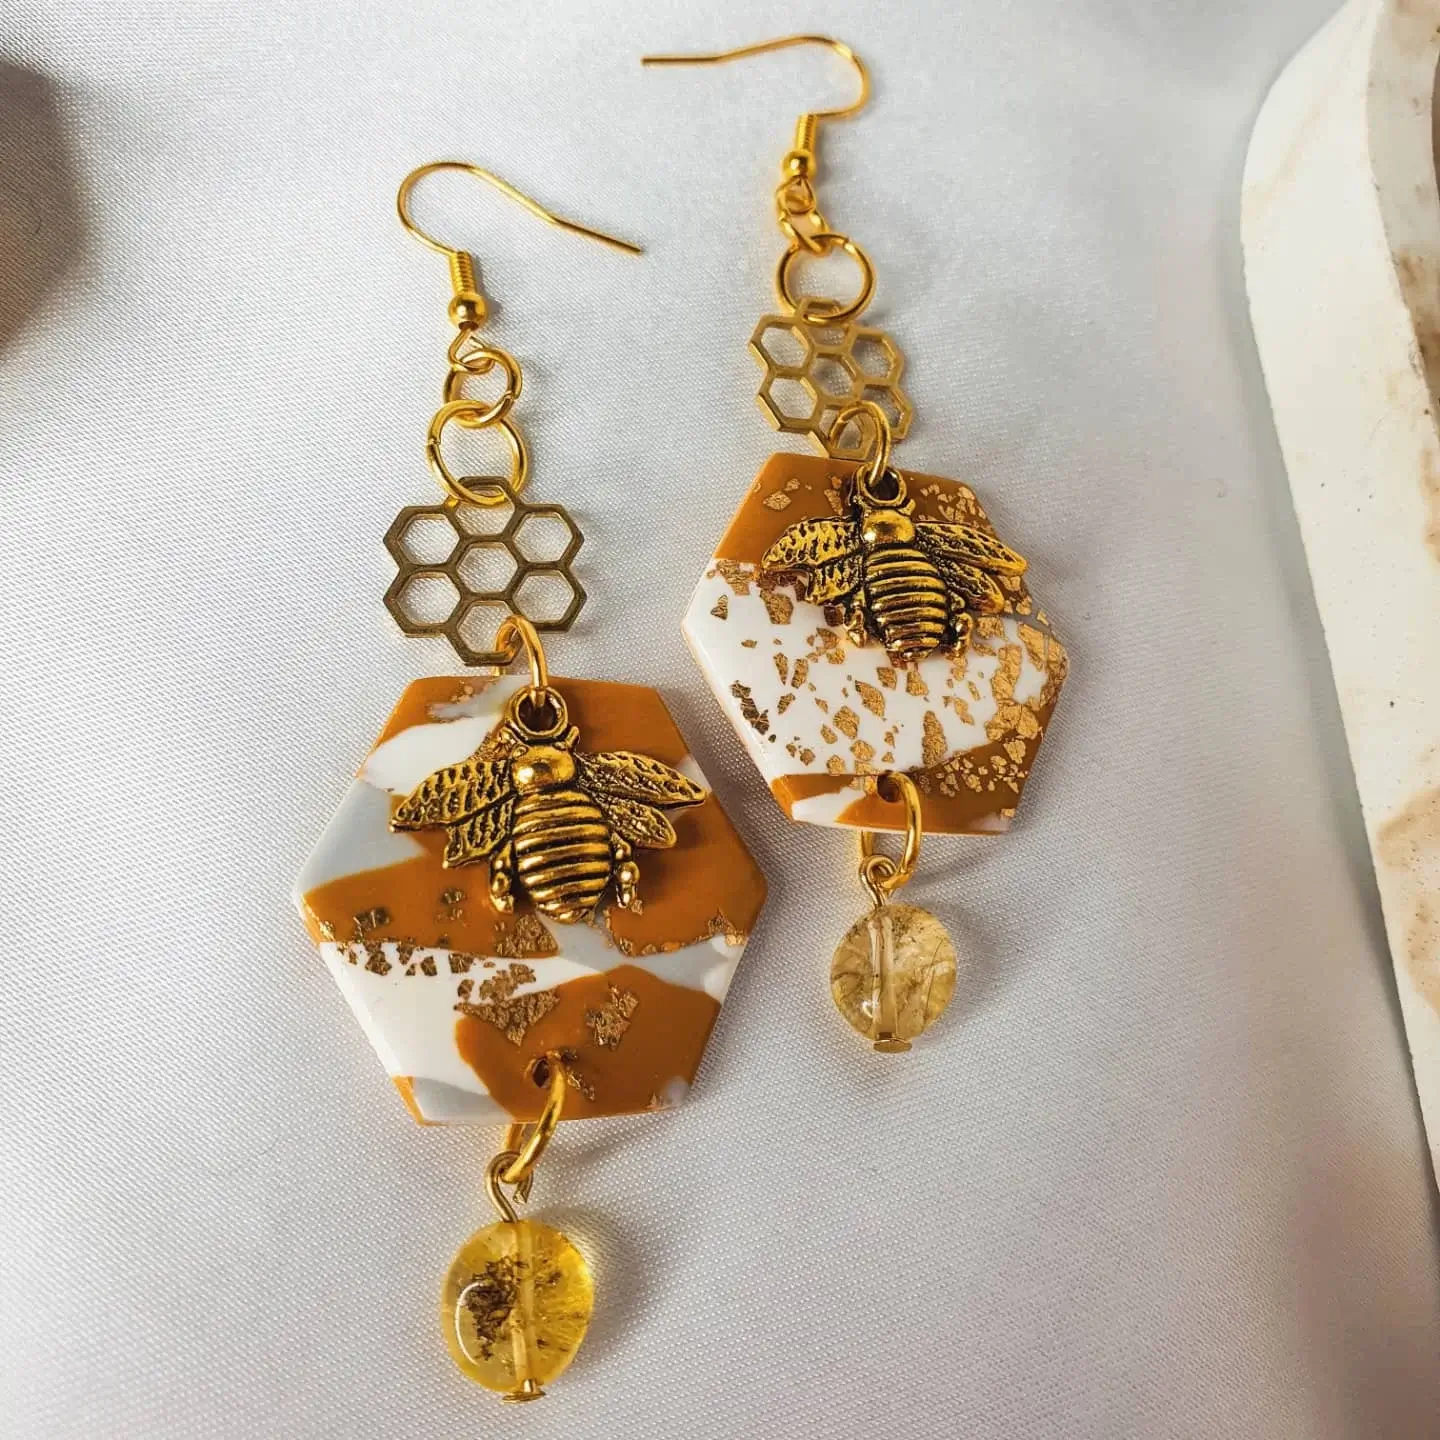 What materials are used to Make Honeycomb Earrings?